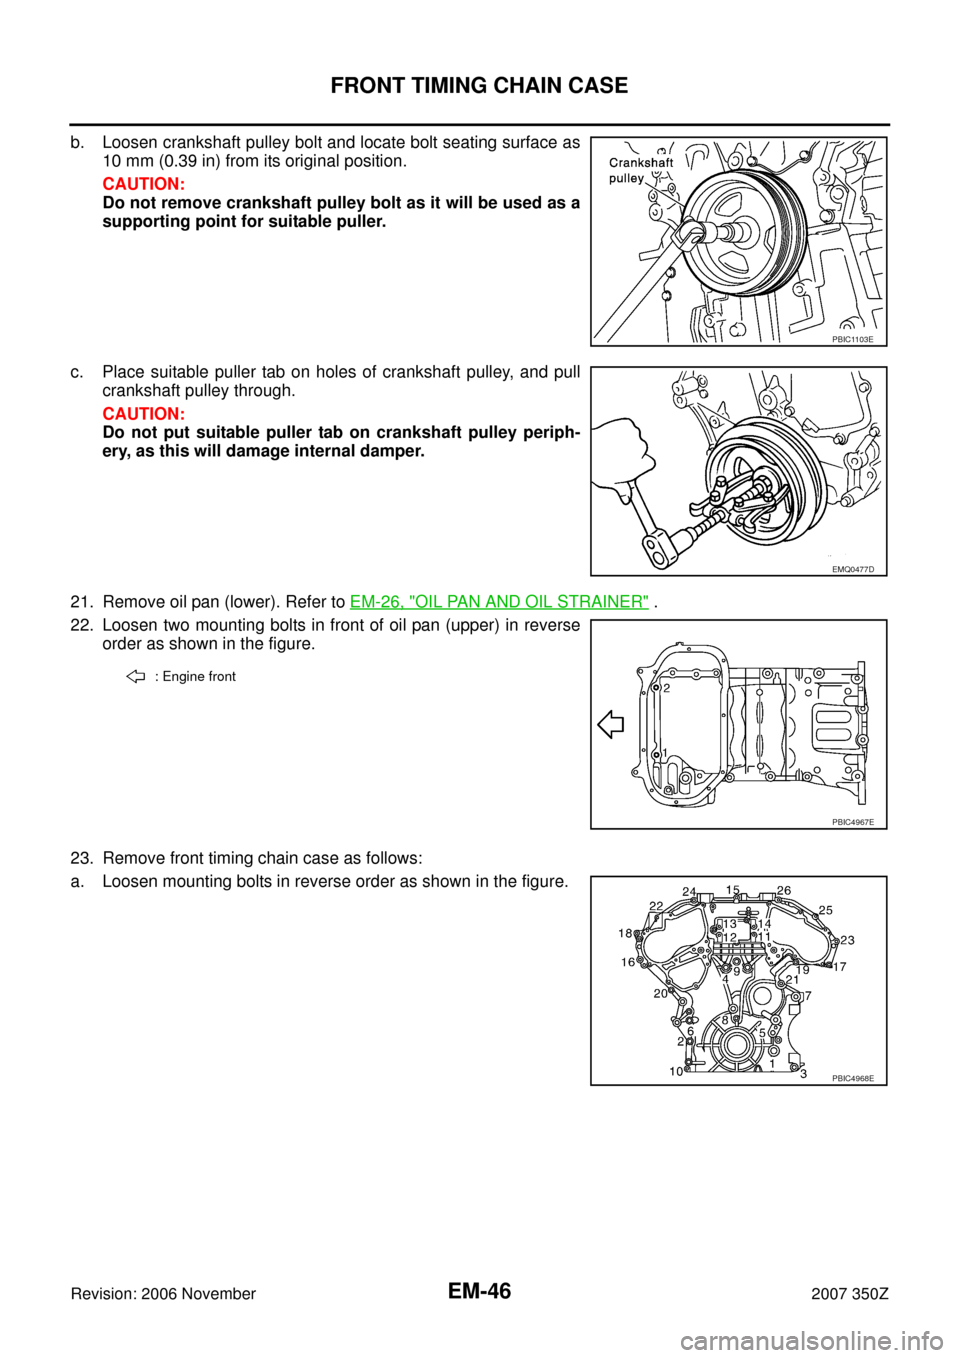 NISSAN 350Z 2007 Z33 Engine Mechanical Service Manual EM-46
FRONT TIMING CHAIN CASE
Revision: 2006 November2007 350Z
b. Loosen crankshaft pulley bolt and locate bolt seating surface as
10 mm (0.39 in) from its original position.
CAUTION:
Do not remove cr